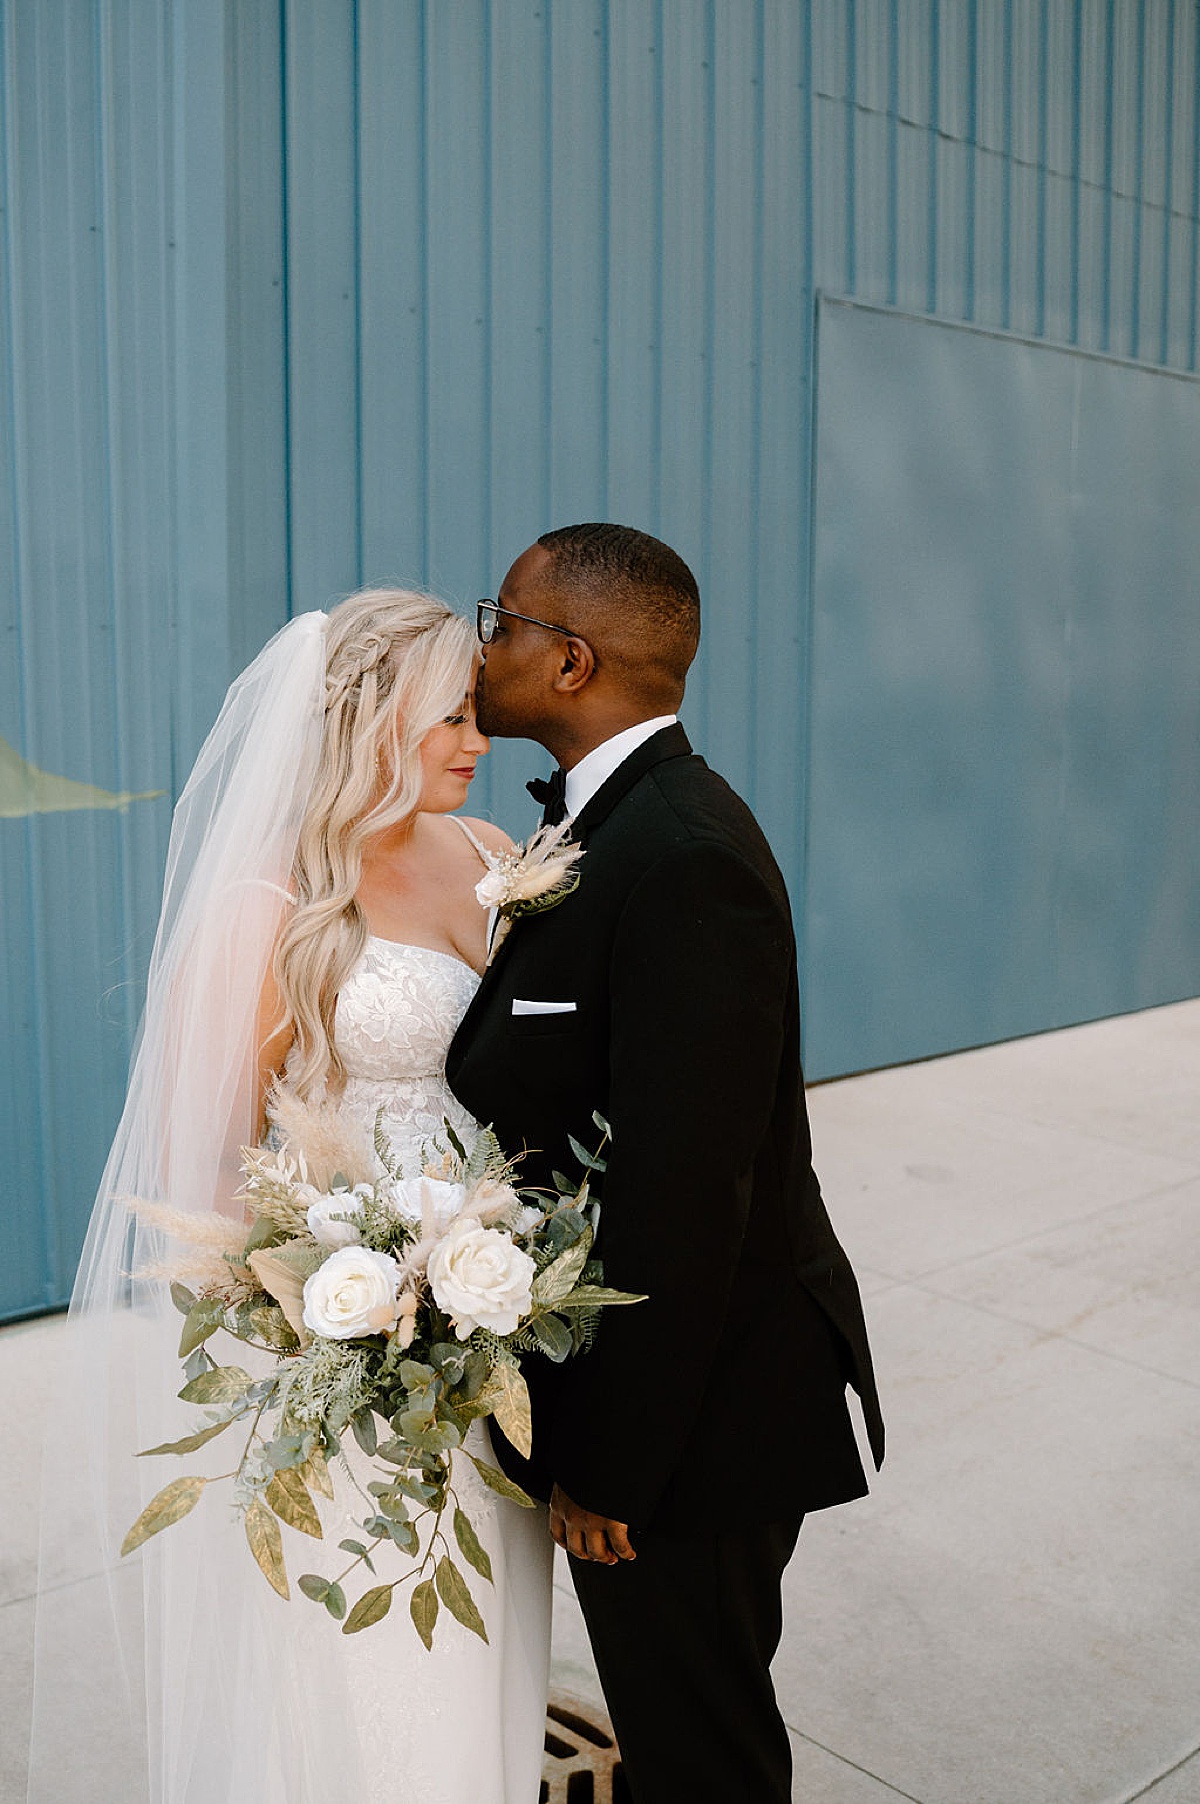 boho bride with braided hair and pampas grass and eucalyptus bouquet poses with groom in front of blue wall during photoshoot with midwest wedding photographer